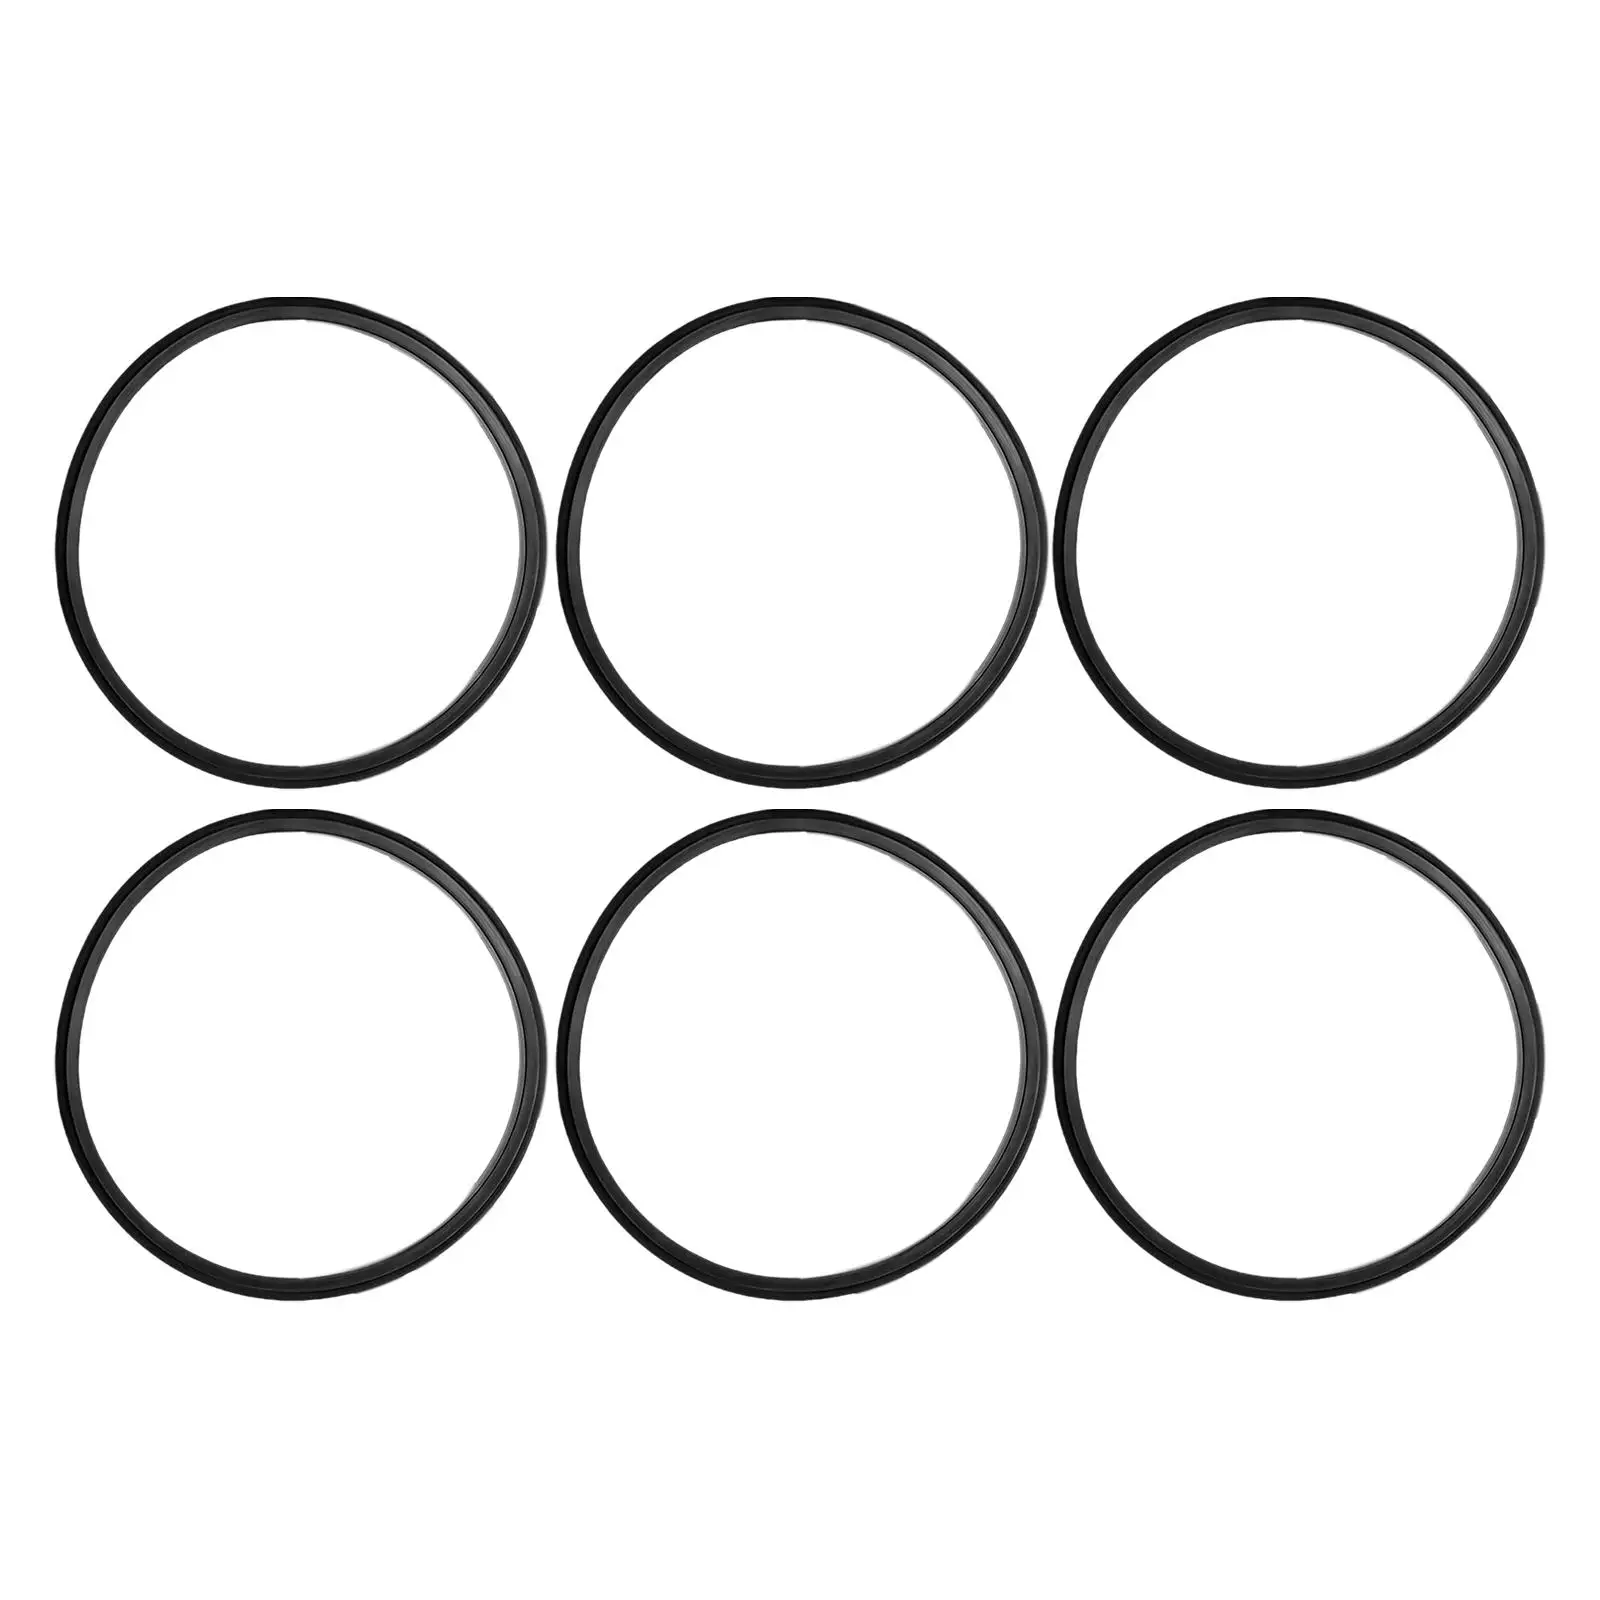 6Pcs Silicone Jar Gasket Gaskets Part Replacement Silicone Sealing Rings